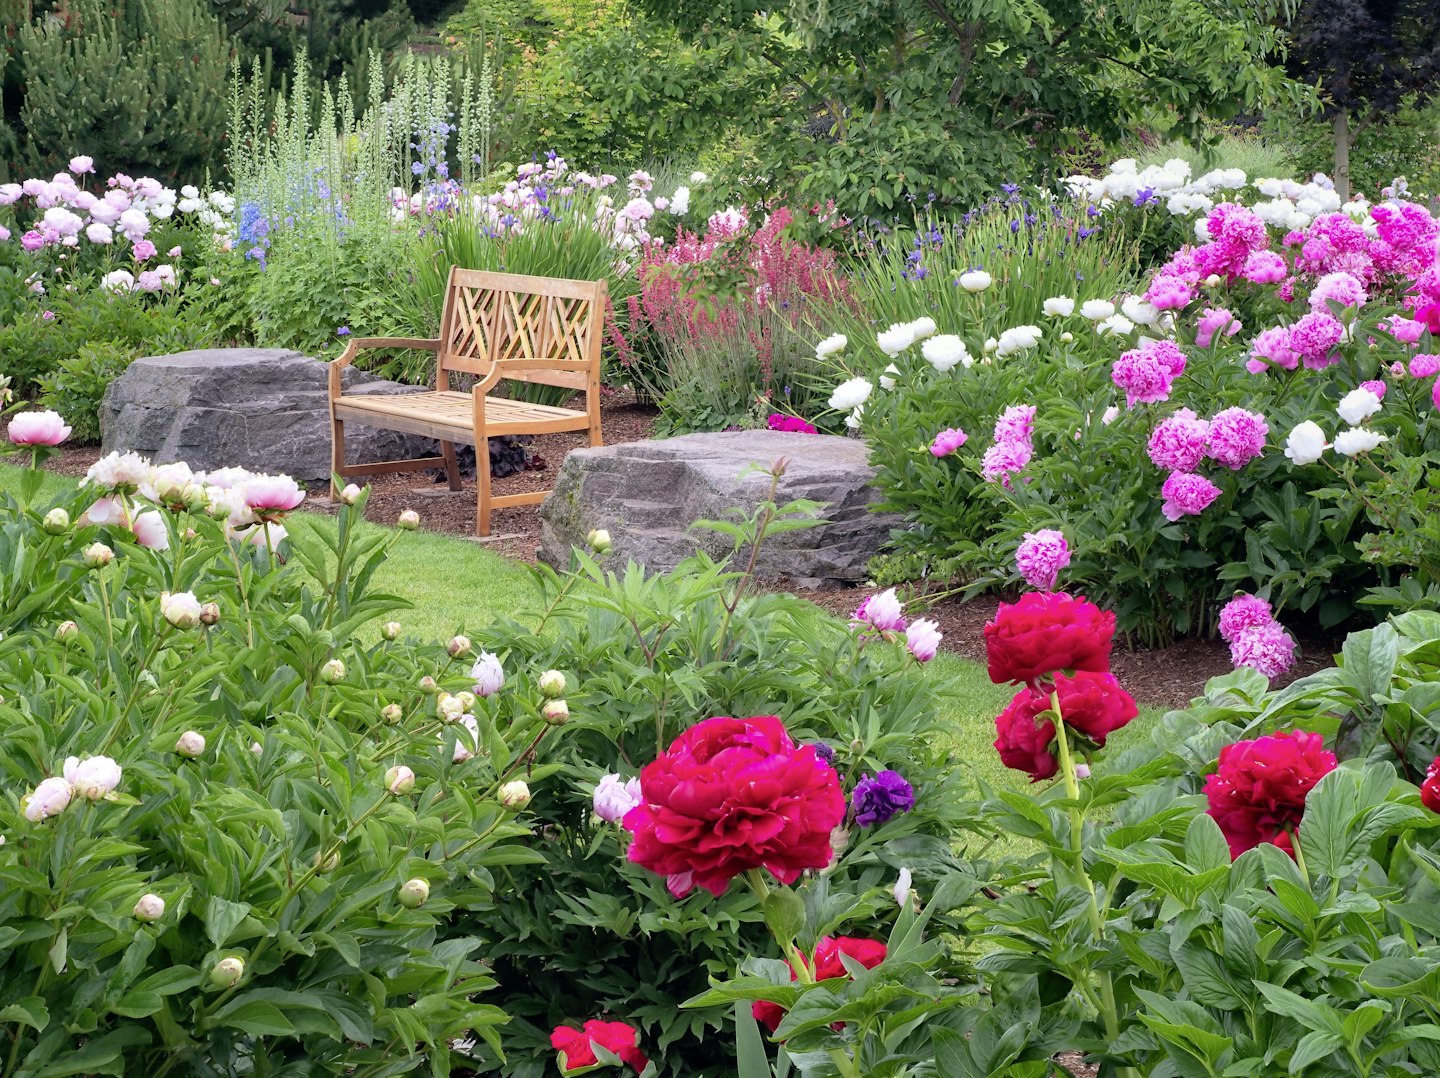 Peonies bring early summer joy to your garden